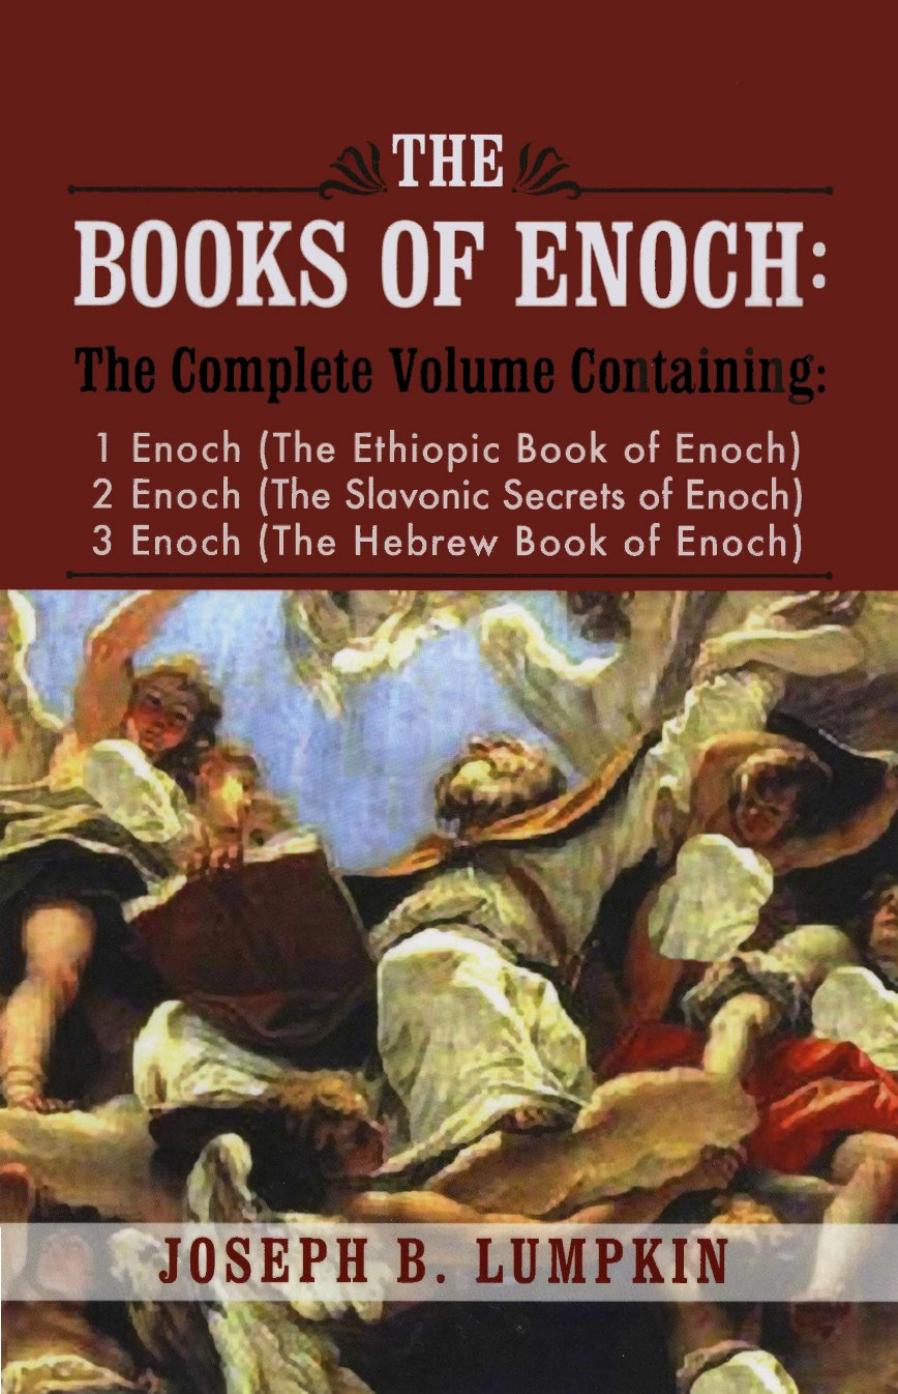 The Books of Enoch: A Complete Volume Containing the Ethiopic, Slavonic and Hebrew Enoch by Lumpkin Joseph B